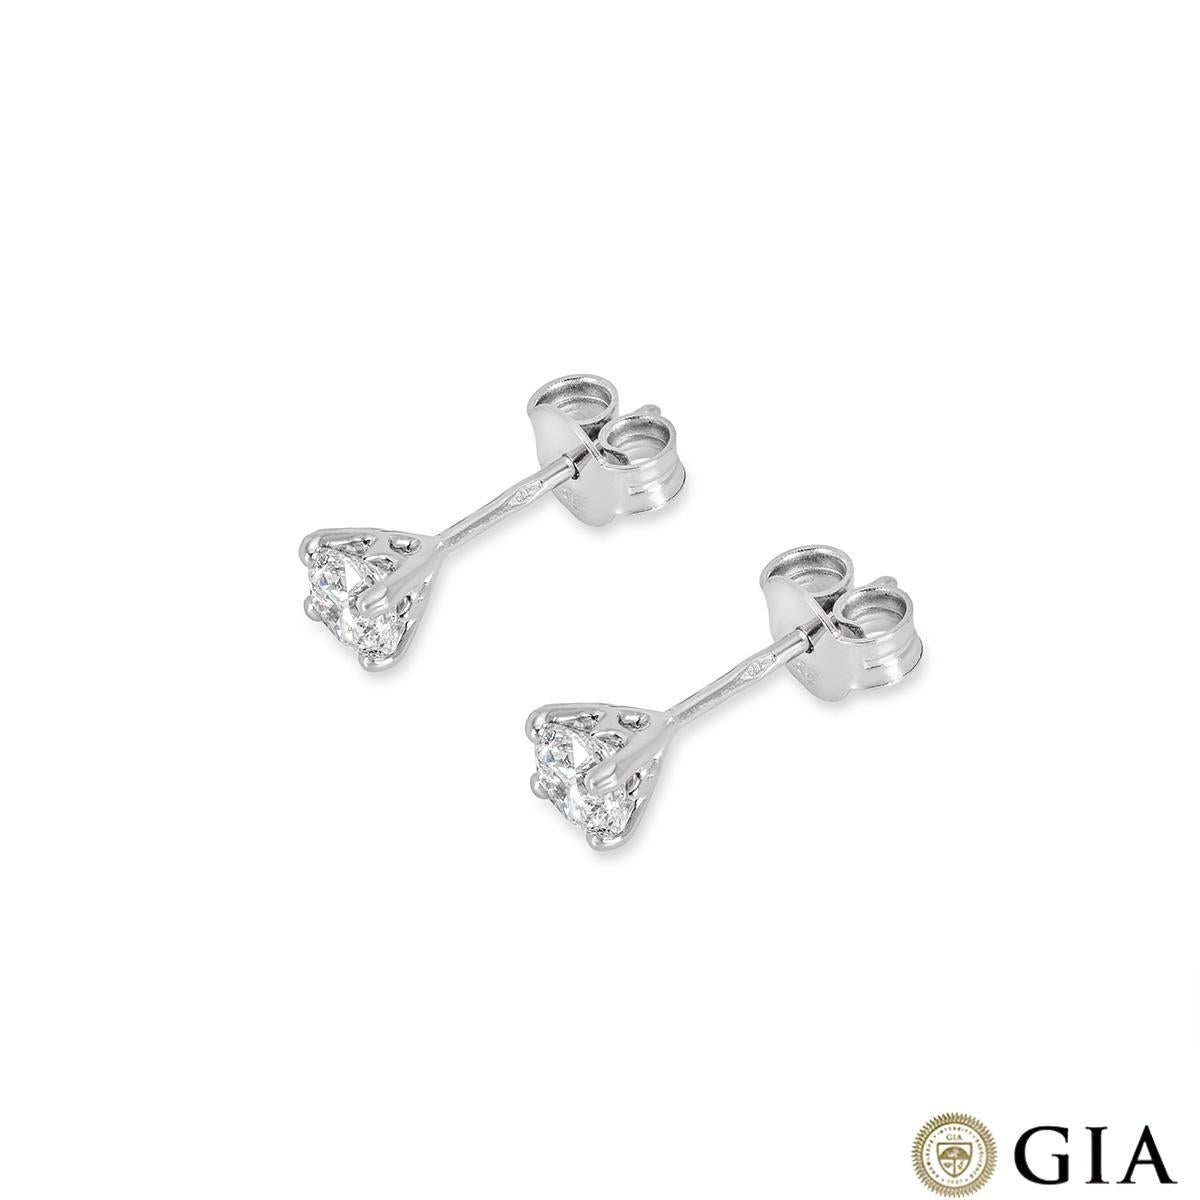 A sparkly pair of 18k white gold diamond stud earrings. The earrings are perfectly matched and feature round brilliant cut diamonds in a 4 claw setting. The diamonds each weigh 0.40ct, are F colour and SI1 clarity. They finish with post and